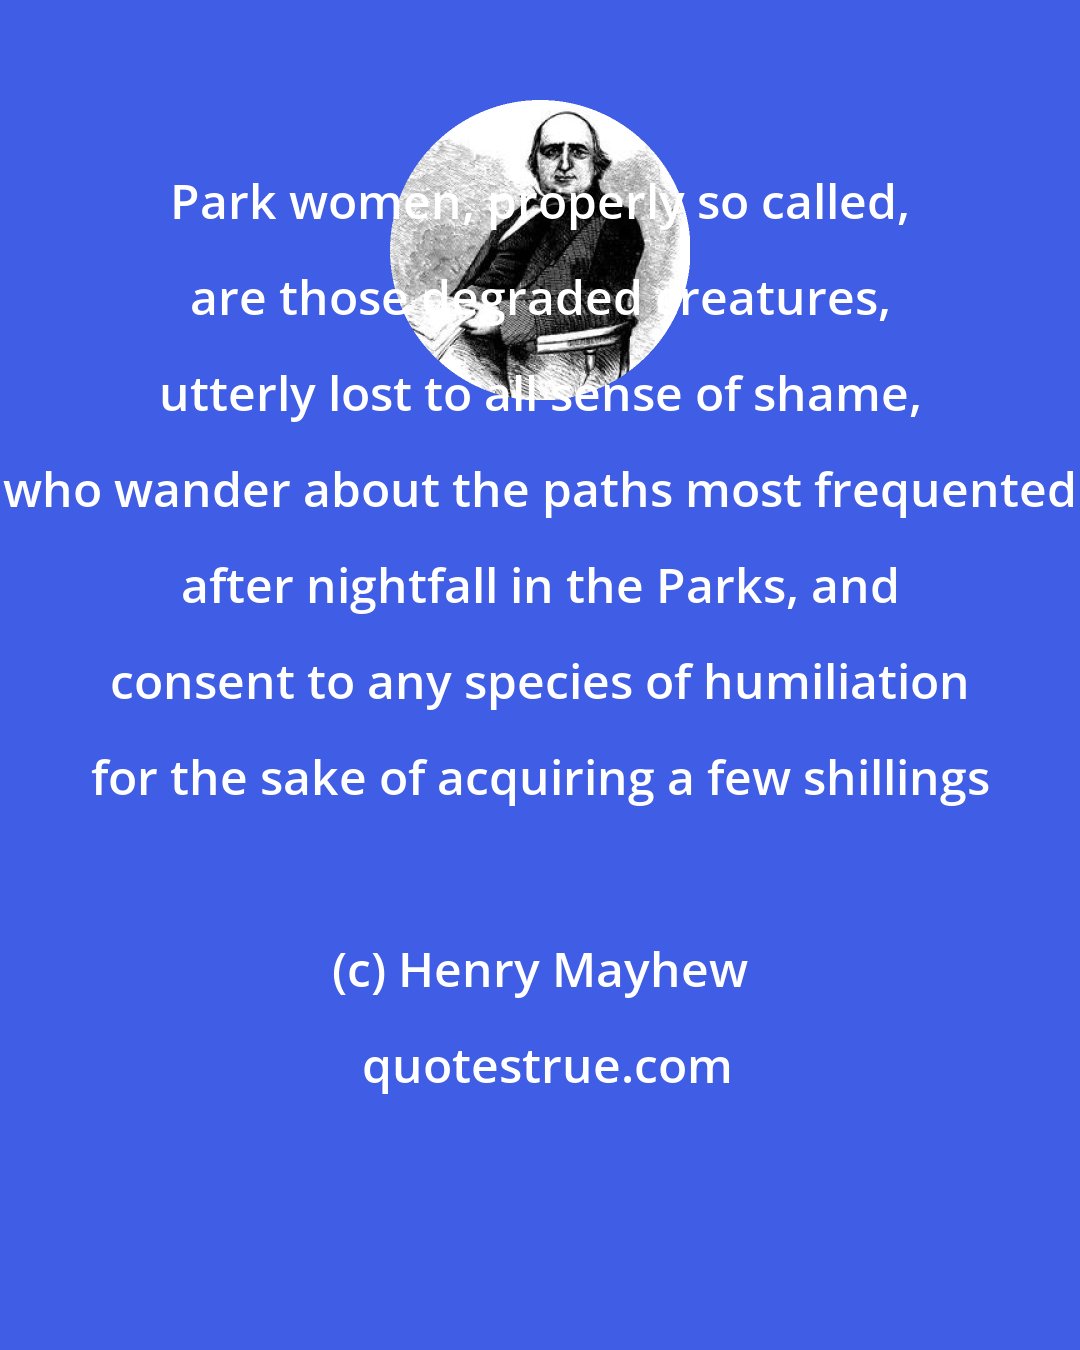 Henry Mayhew: Park women, properly so called, are those degraded creatures, utterly lost to all sense of shame, who wander about the paths most frequented after nightfall in the Parks, and consent to any species of humiliation for the sake of acquiring a few shillings